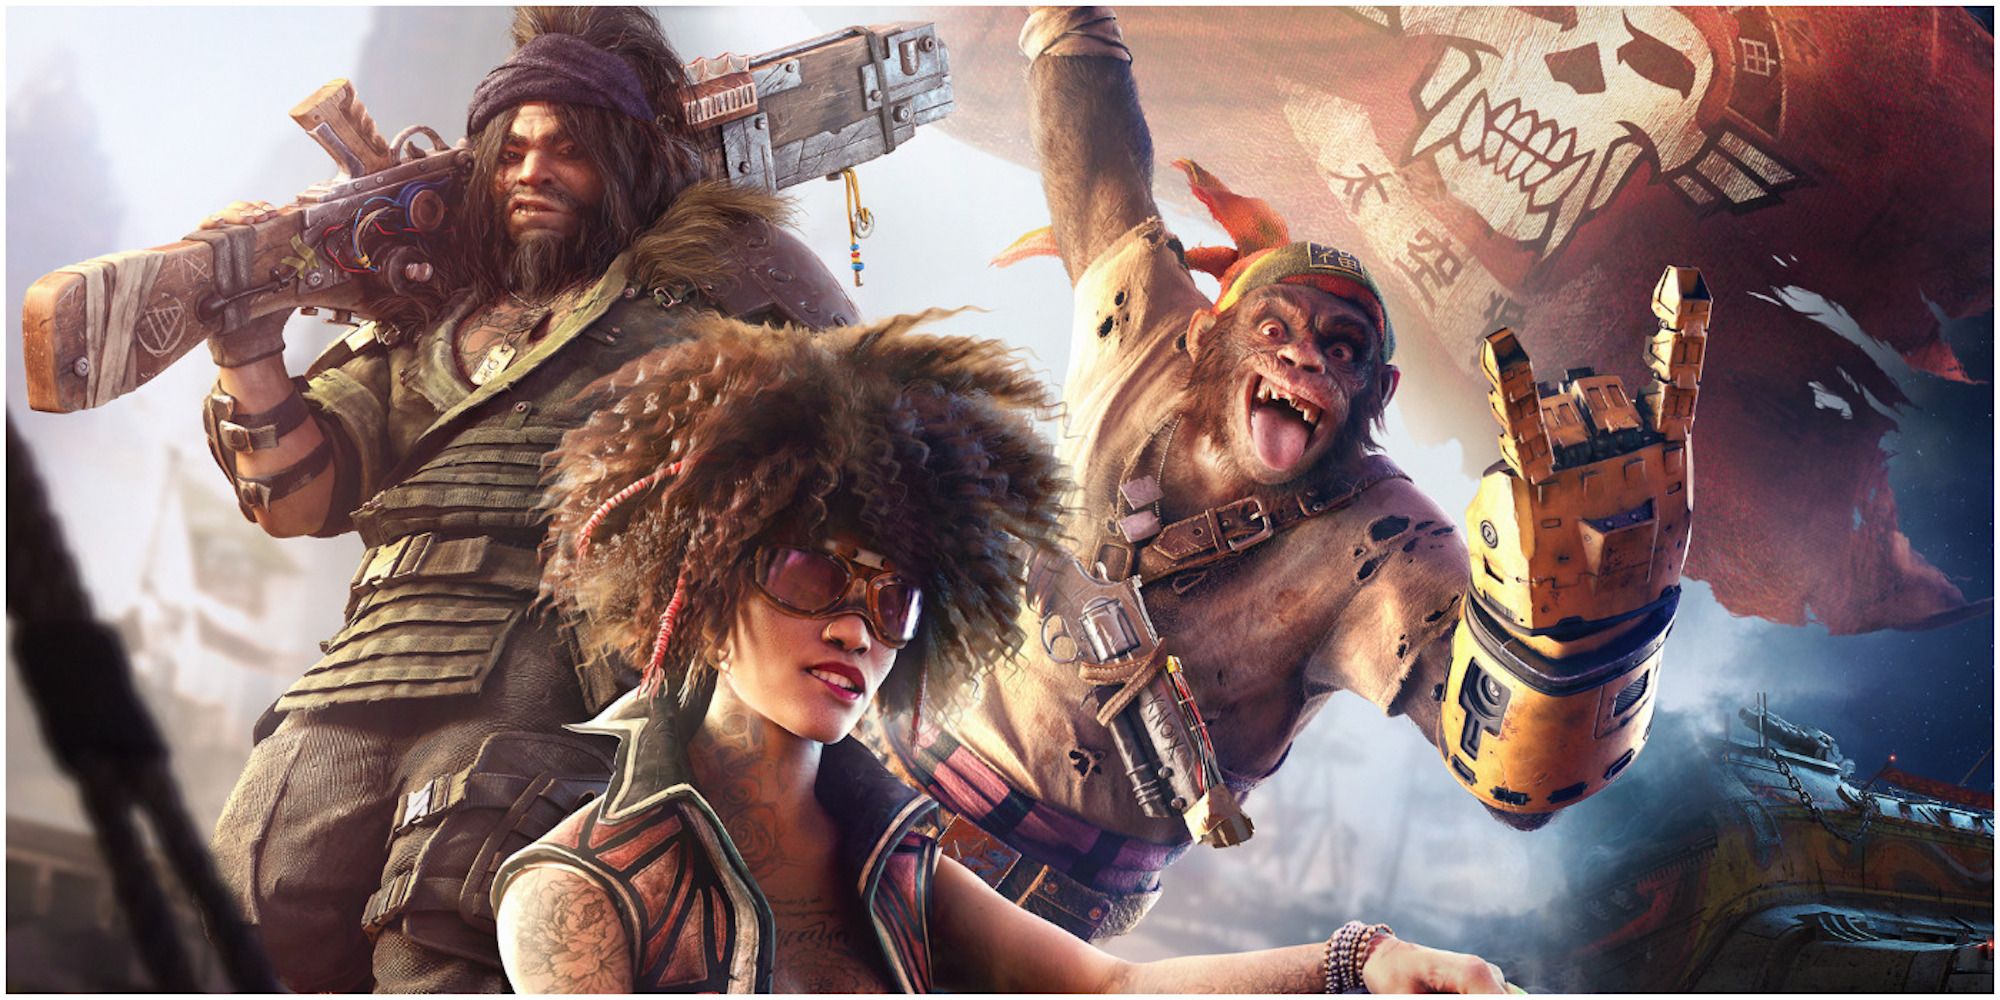 Promo art featuring characters from Beyond Good and Evil 2